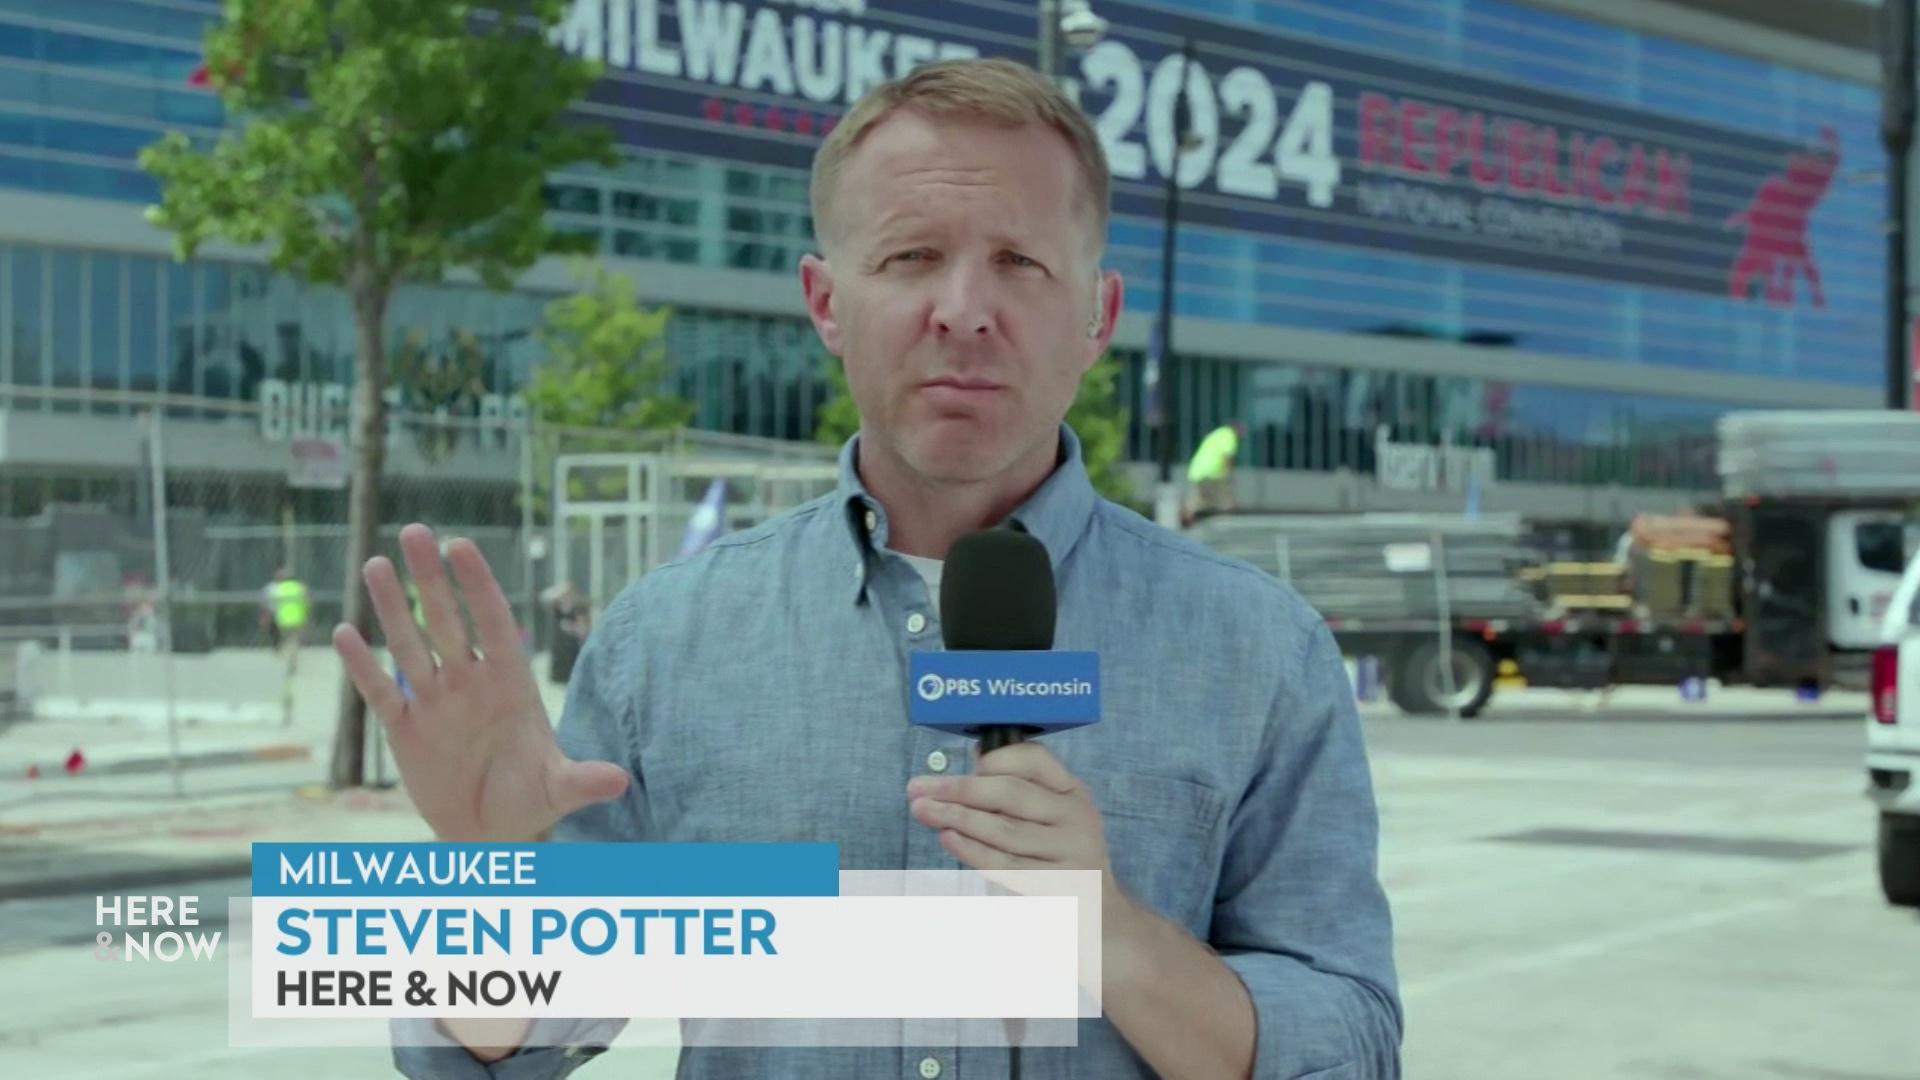 Steven Potter on security planning in Milwaukee for the RNC